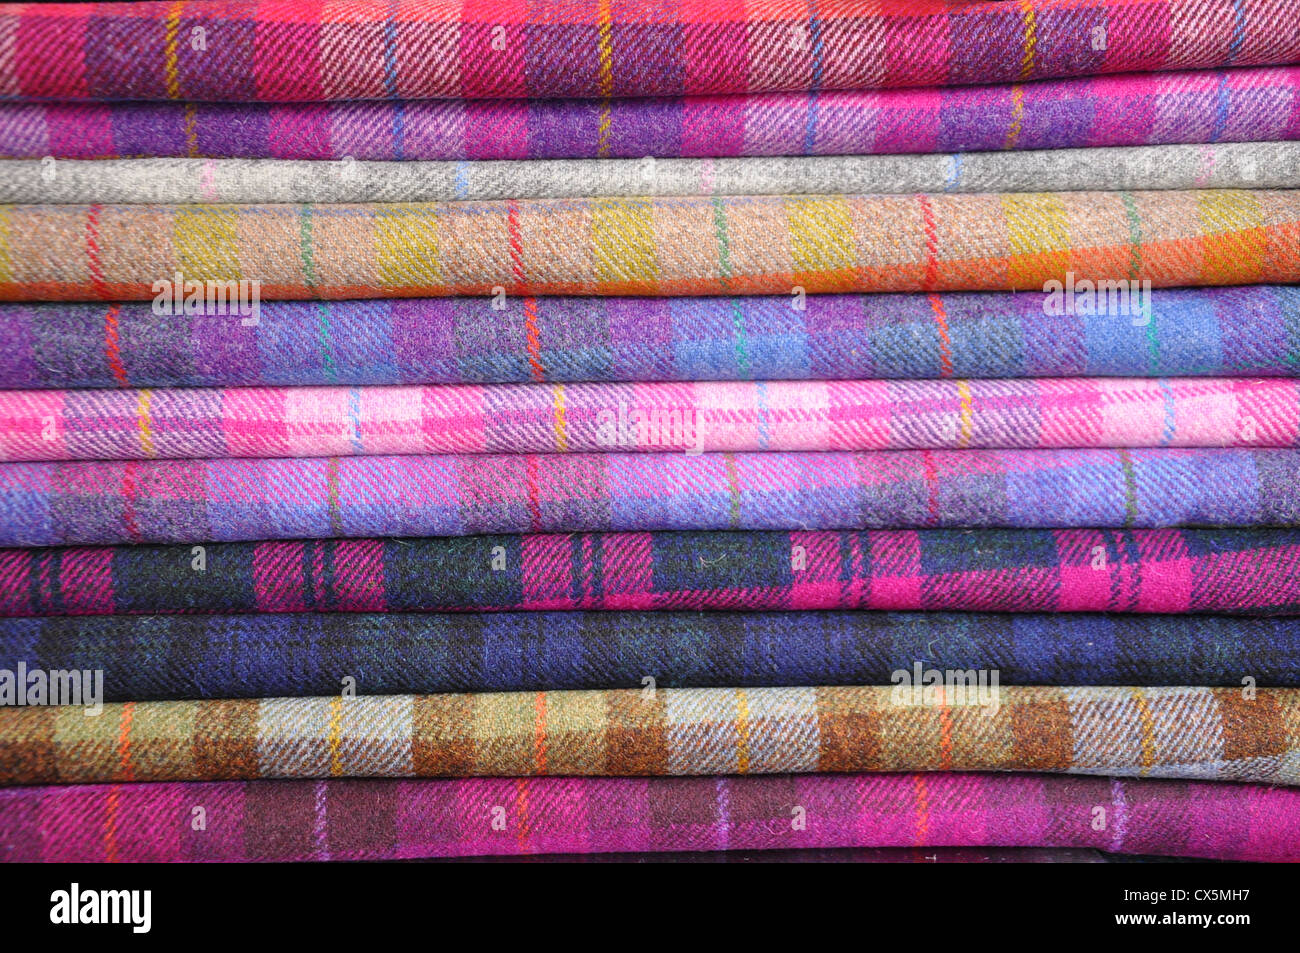 A stack of folded Harris Tweed in shades of pink and purple Stock Photo